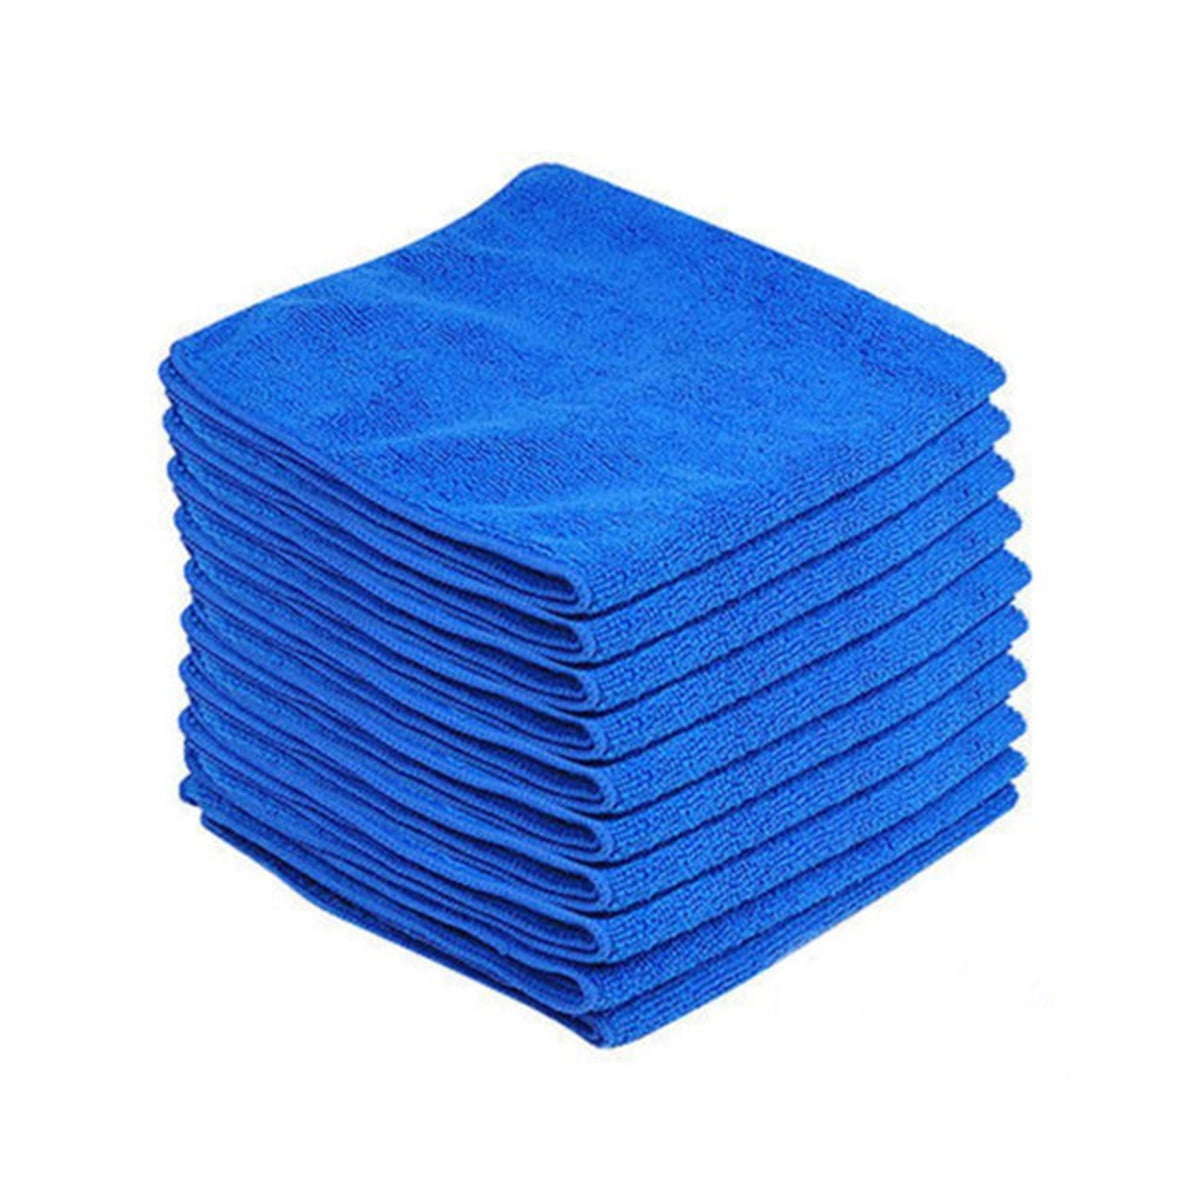 1pc Blue Cleaning Cloth, Minimalist Polyester Cleaning Rag For Kitchen